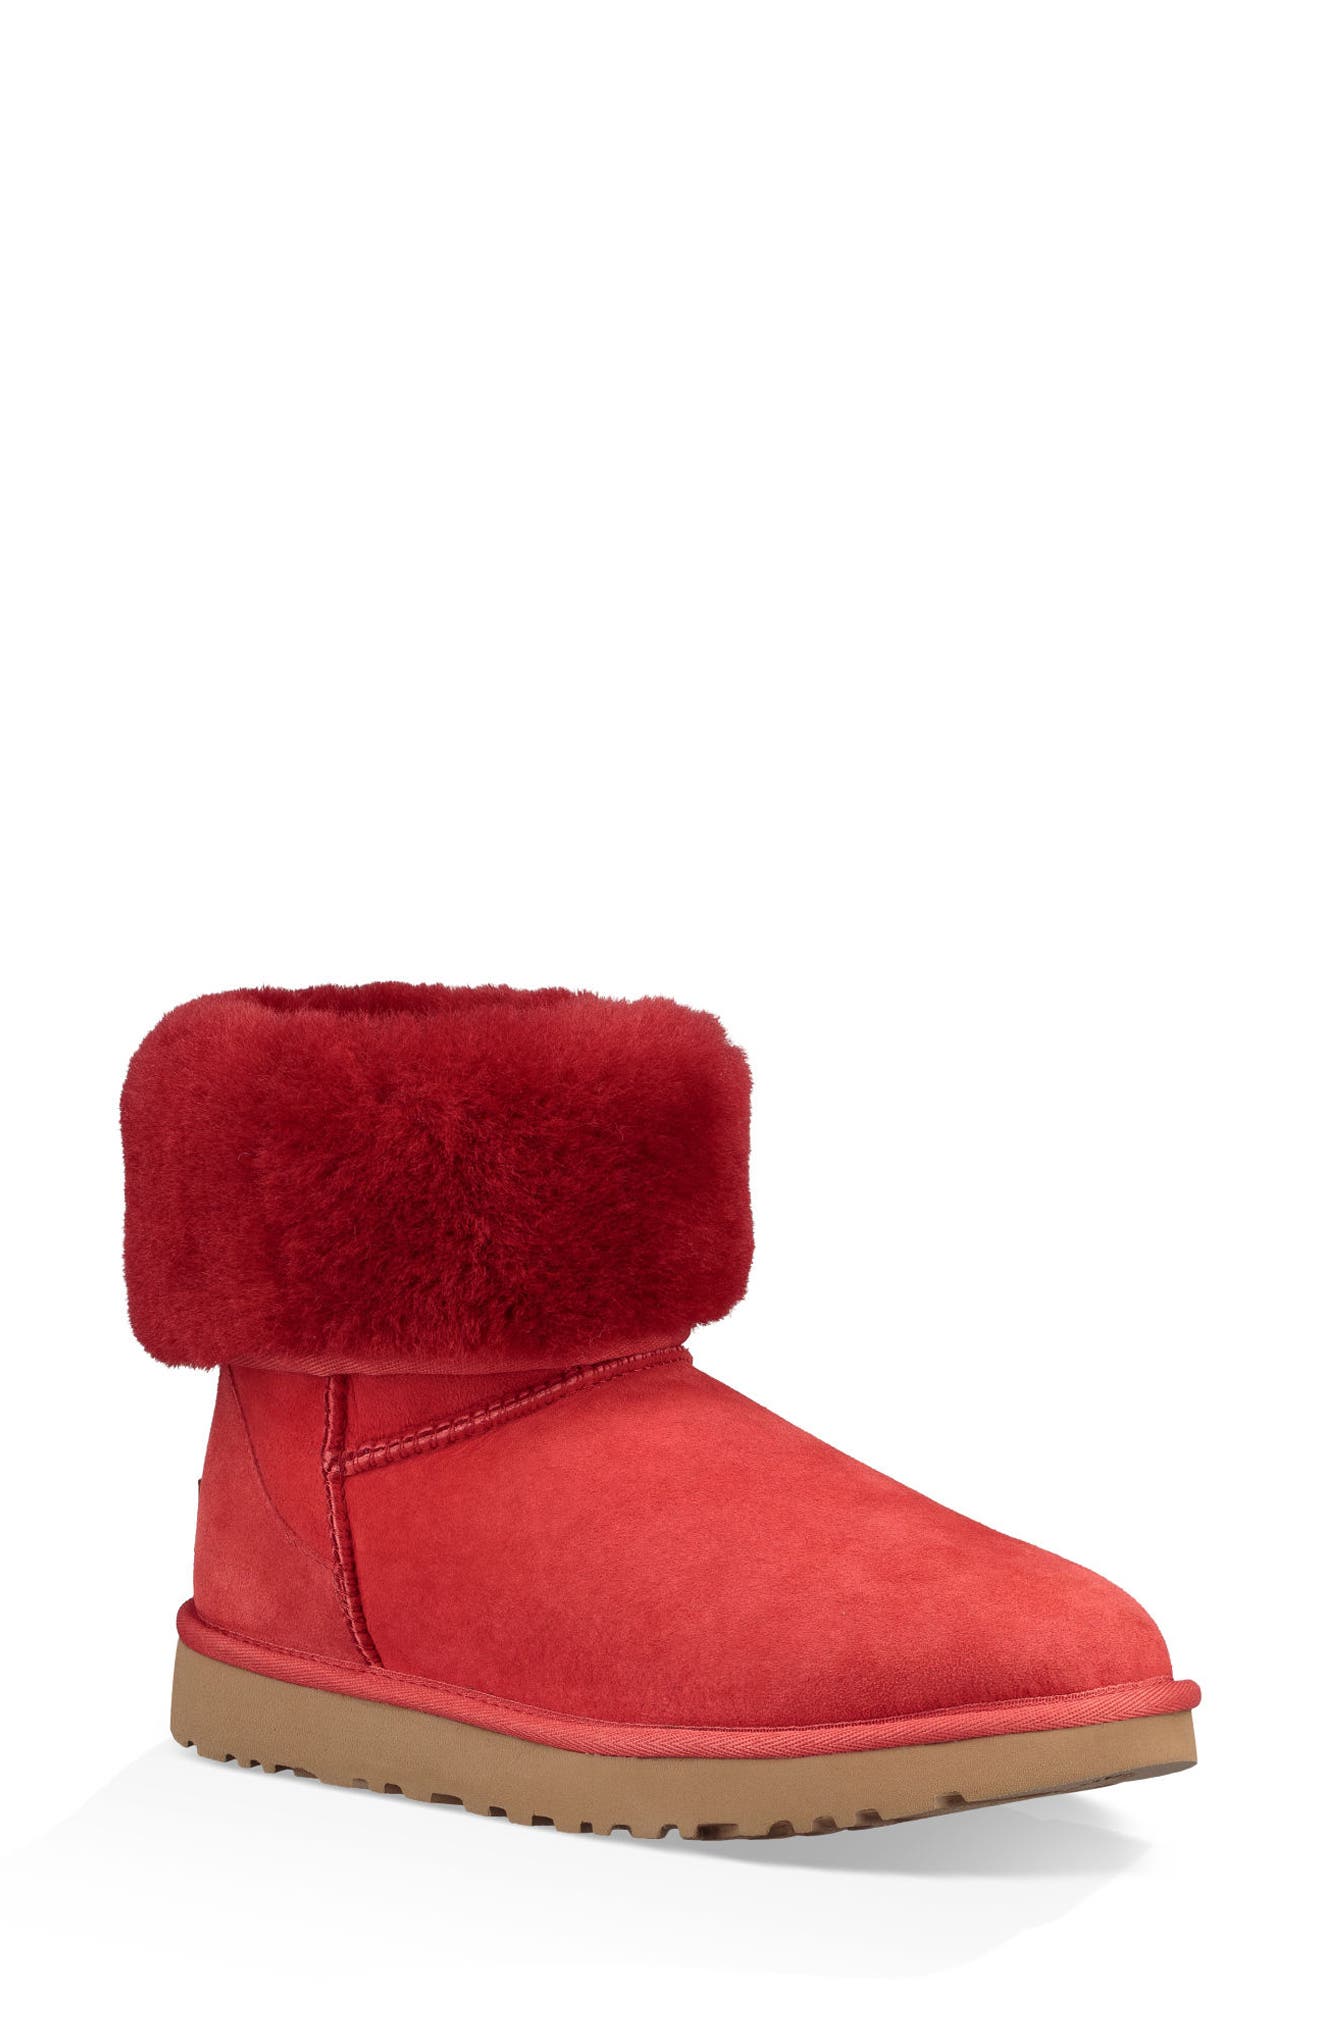 real ugg boots on sale uk